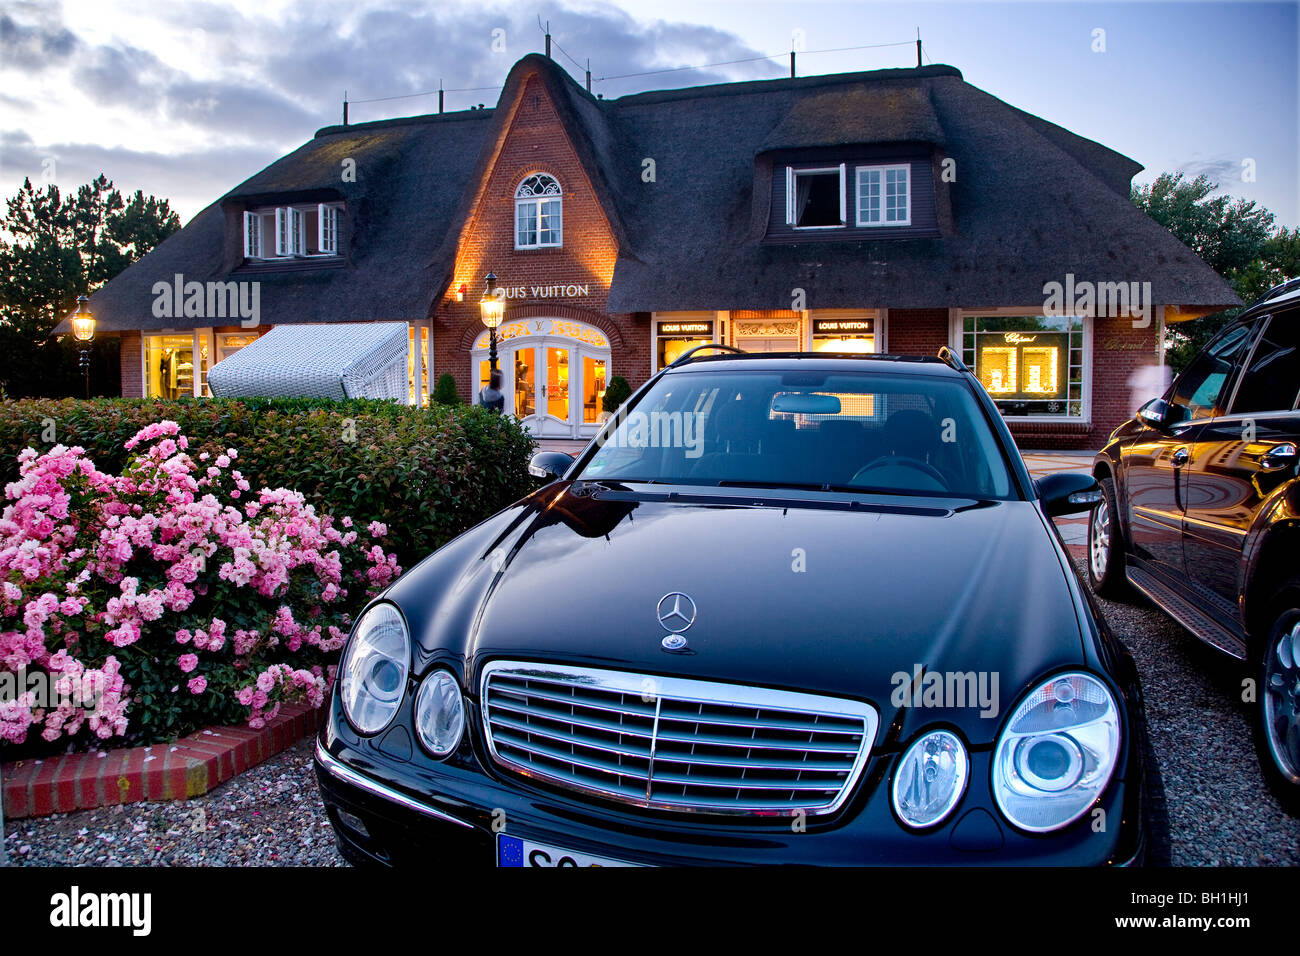 Car parking near a boutique, Kampen, Sylt Island, Schleswig-Holstein, Germany Stock Photo